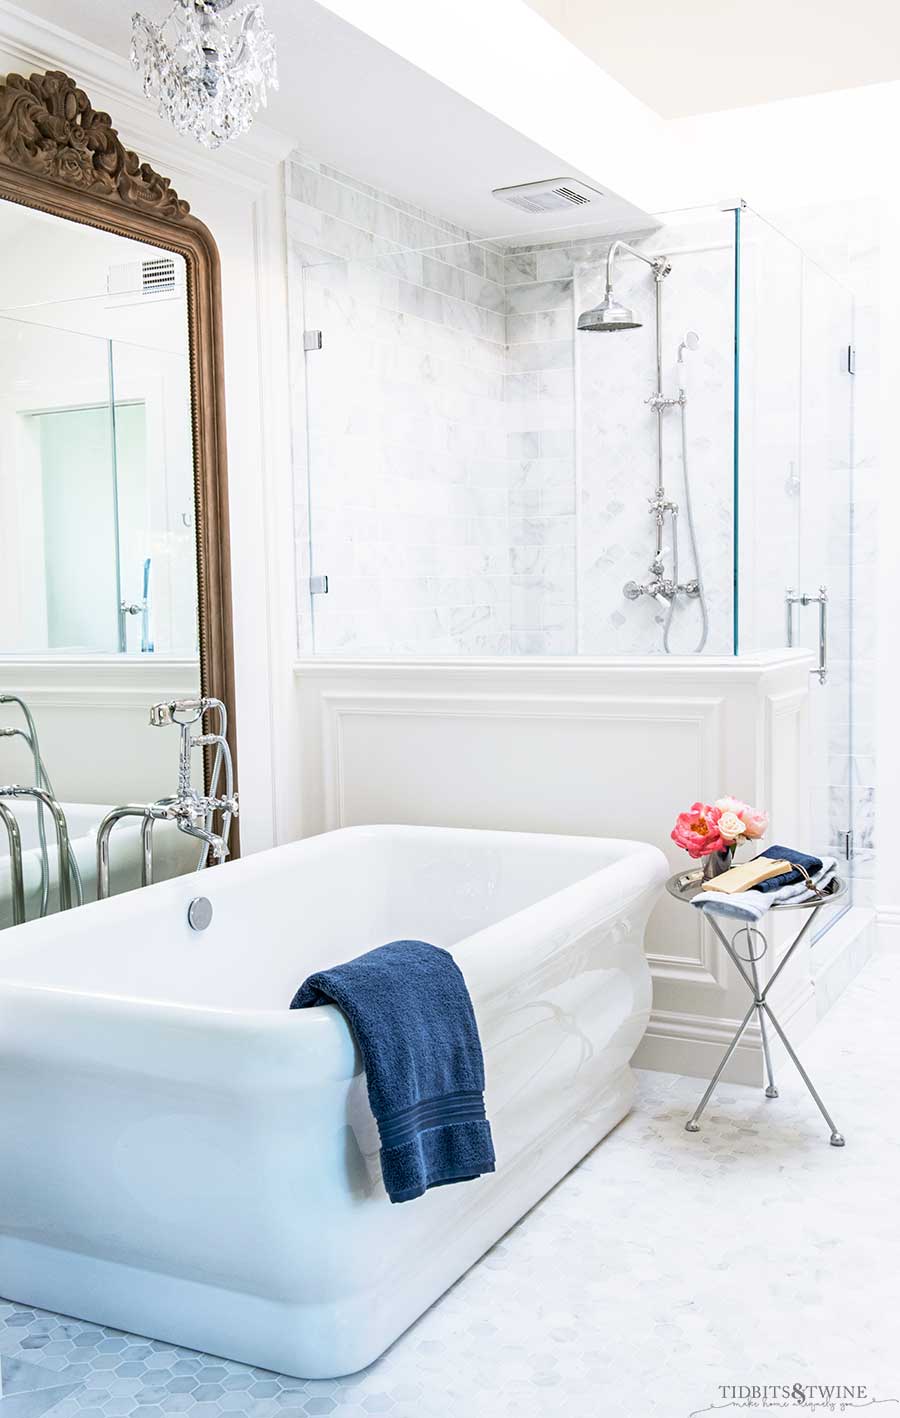 Elegant french master bathroom with freestanding tub next to shower with pony wall and white trim